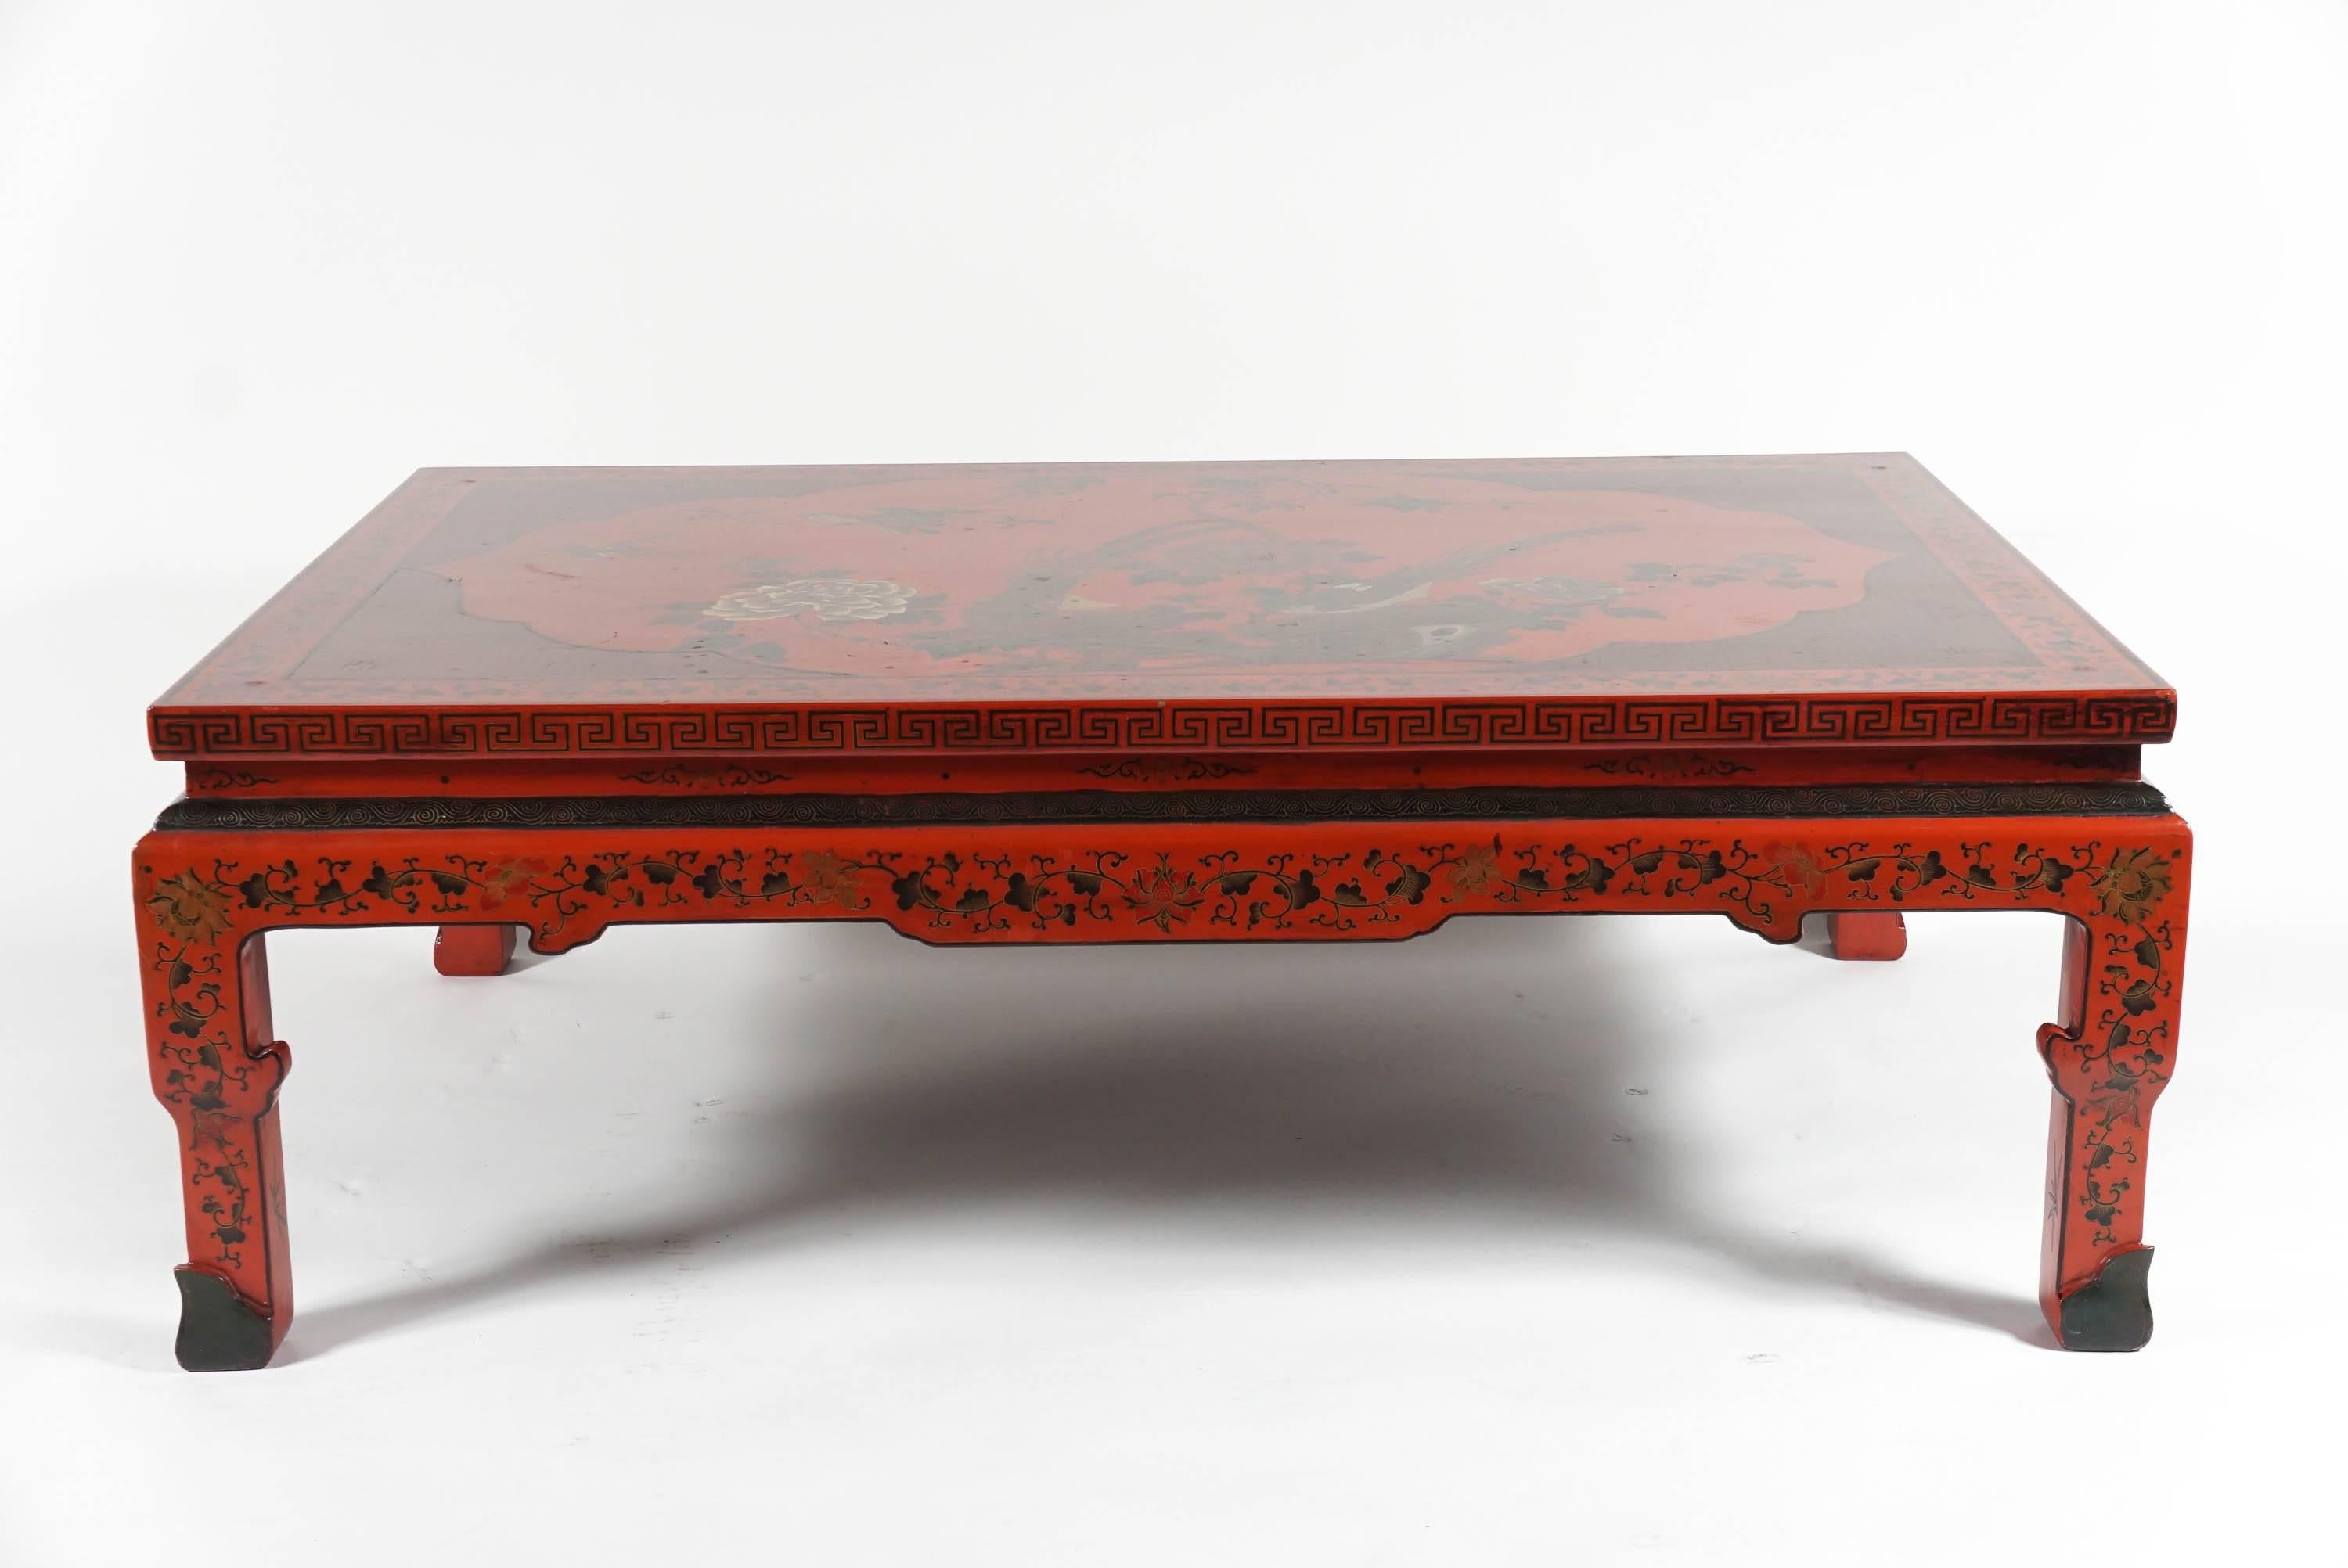 Beautiful highly detailed Chinoiserie coffee table. Richly colored and exciting looking.